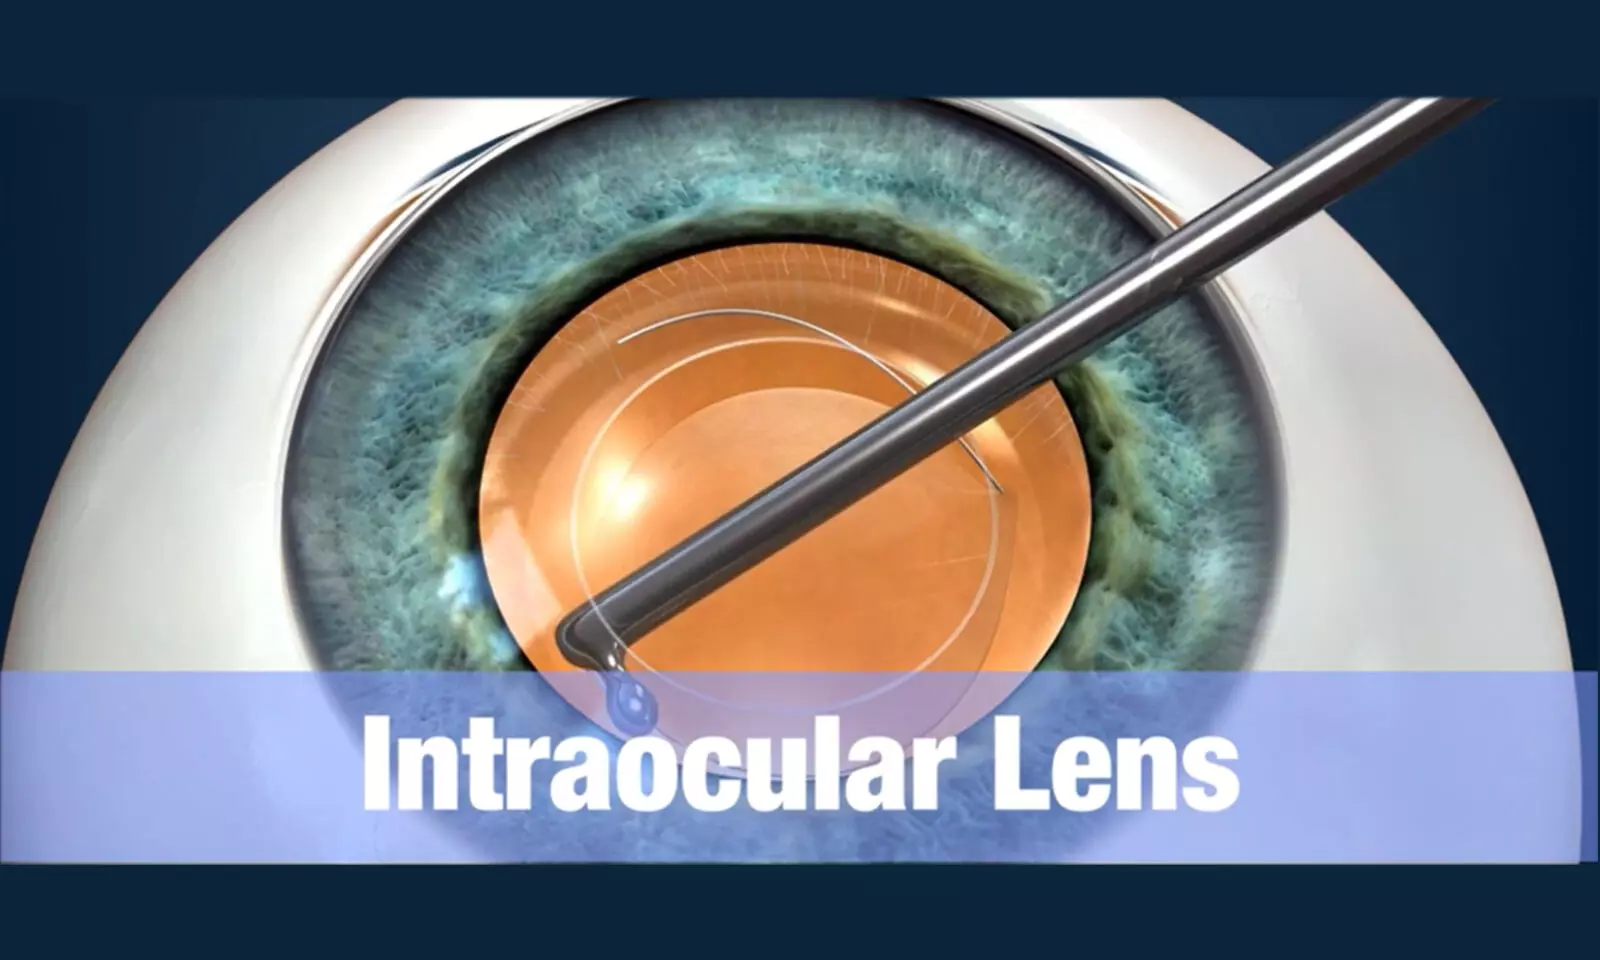 Use of Artificial tears drops reduces refractive errors after cataract surgery